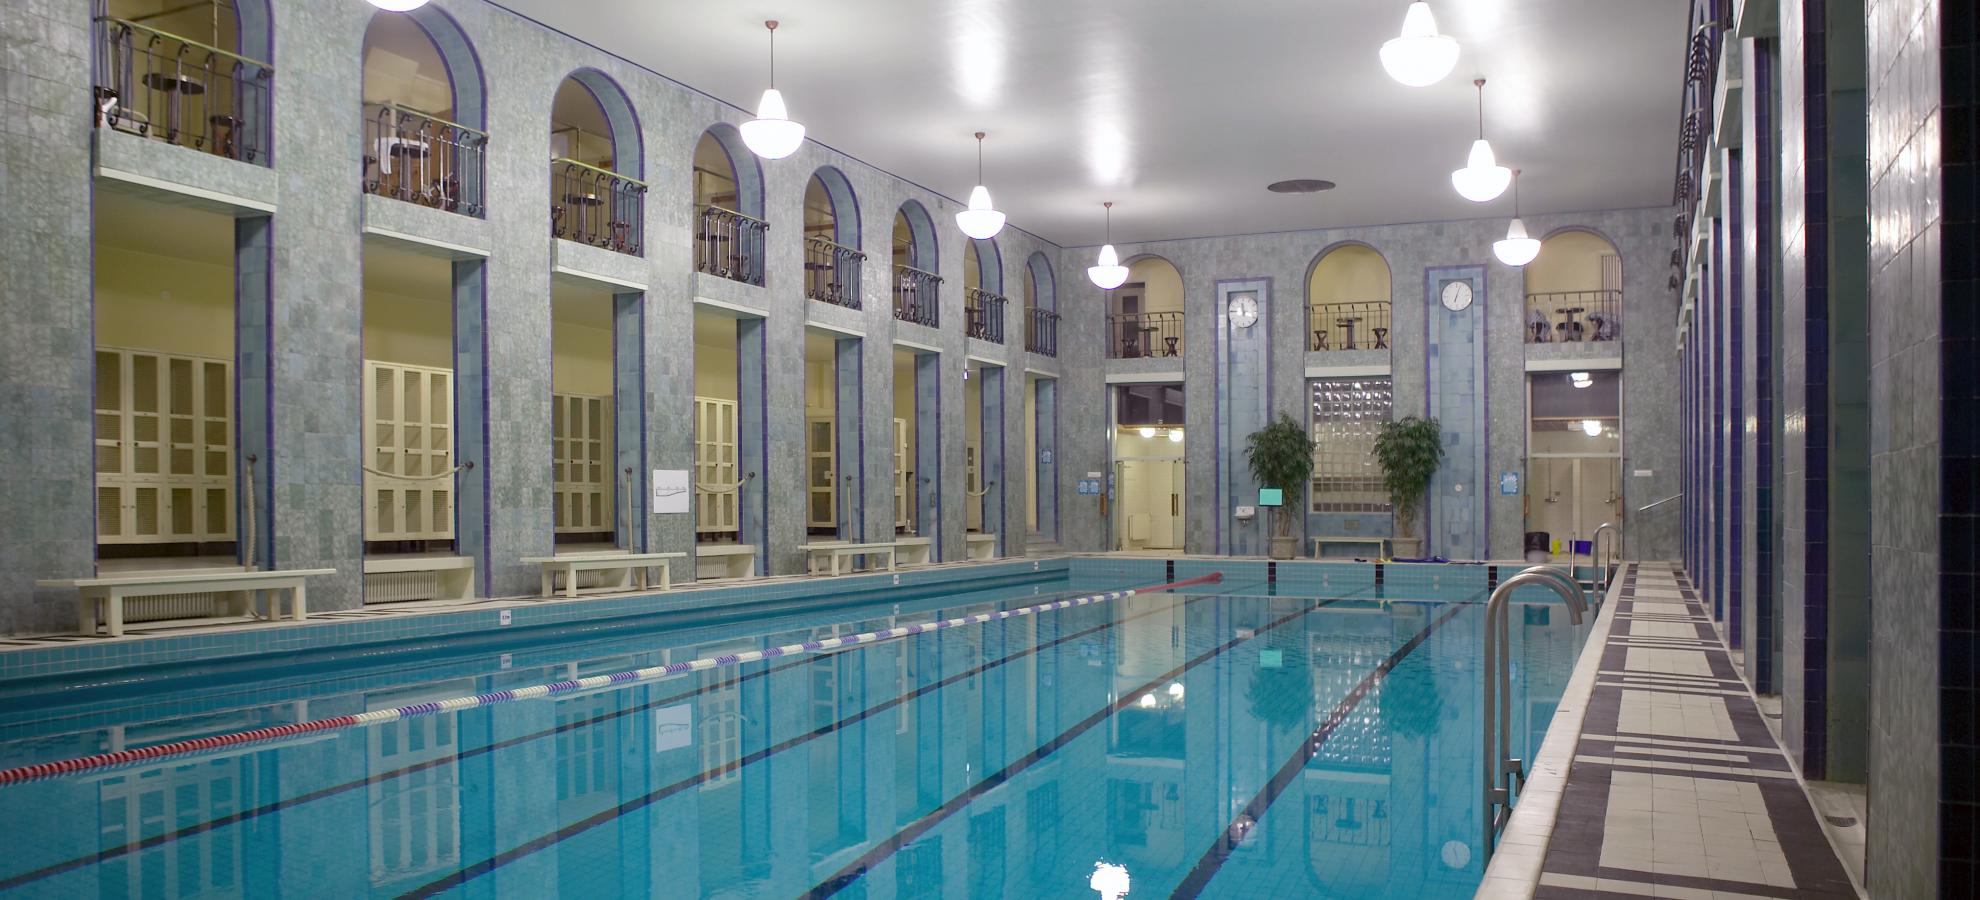 Inside Yrjönkatu's swimming hall, the long pool stretches many metres to the back of a grand hall surrounded by multiple archways, with two rows of chandelier-like lights hanging above the pool.